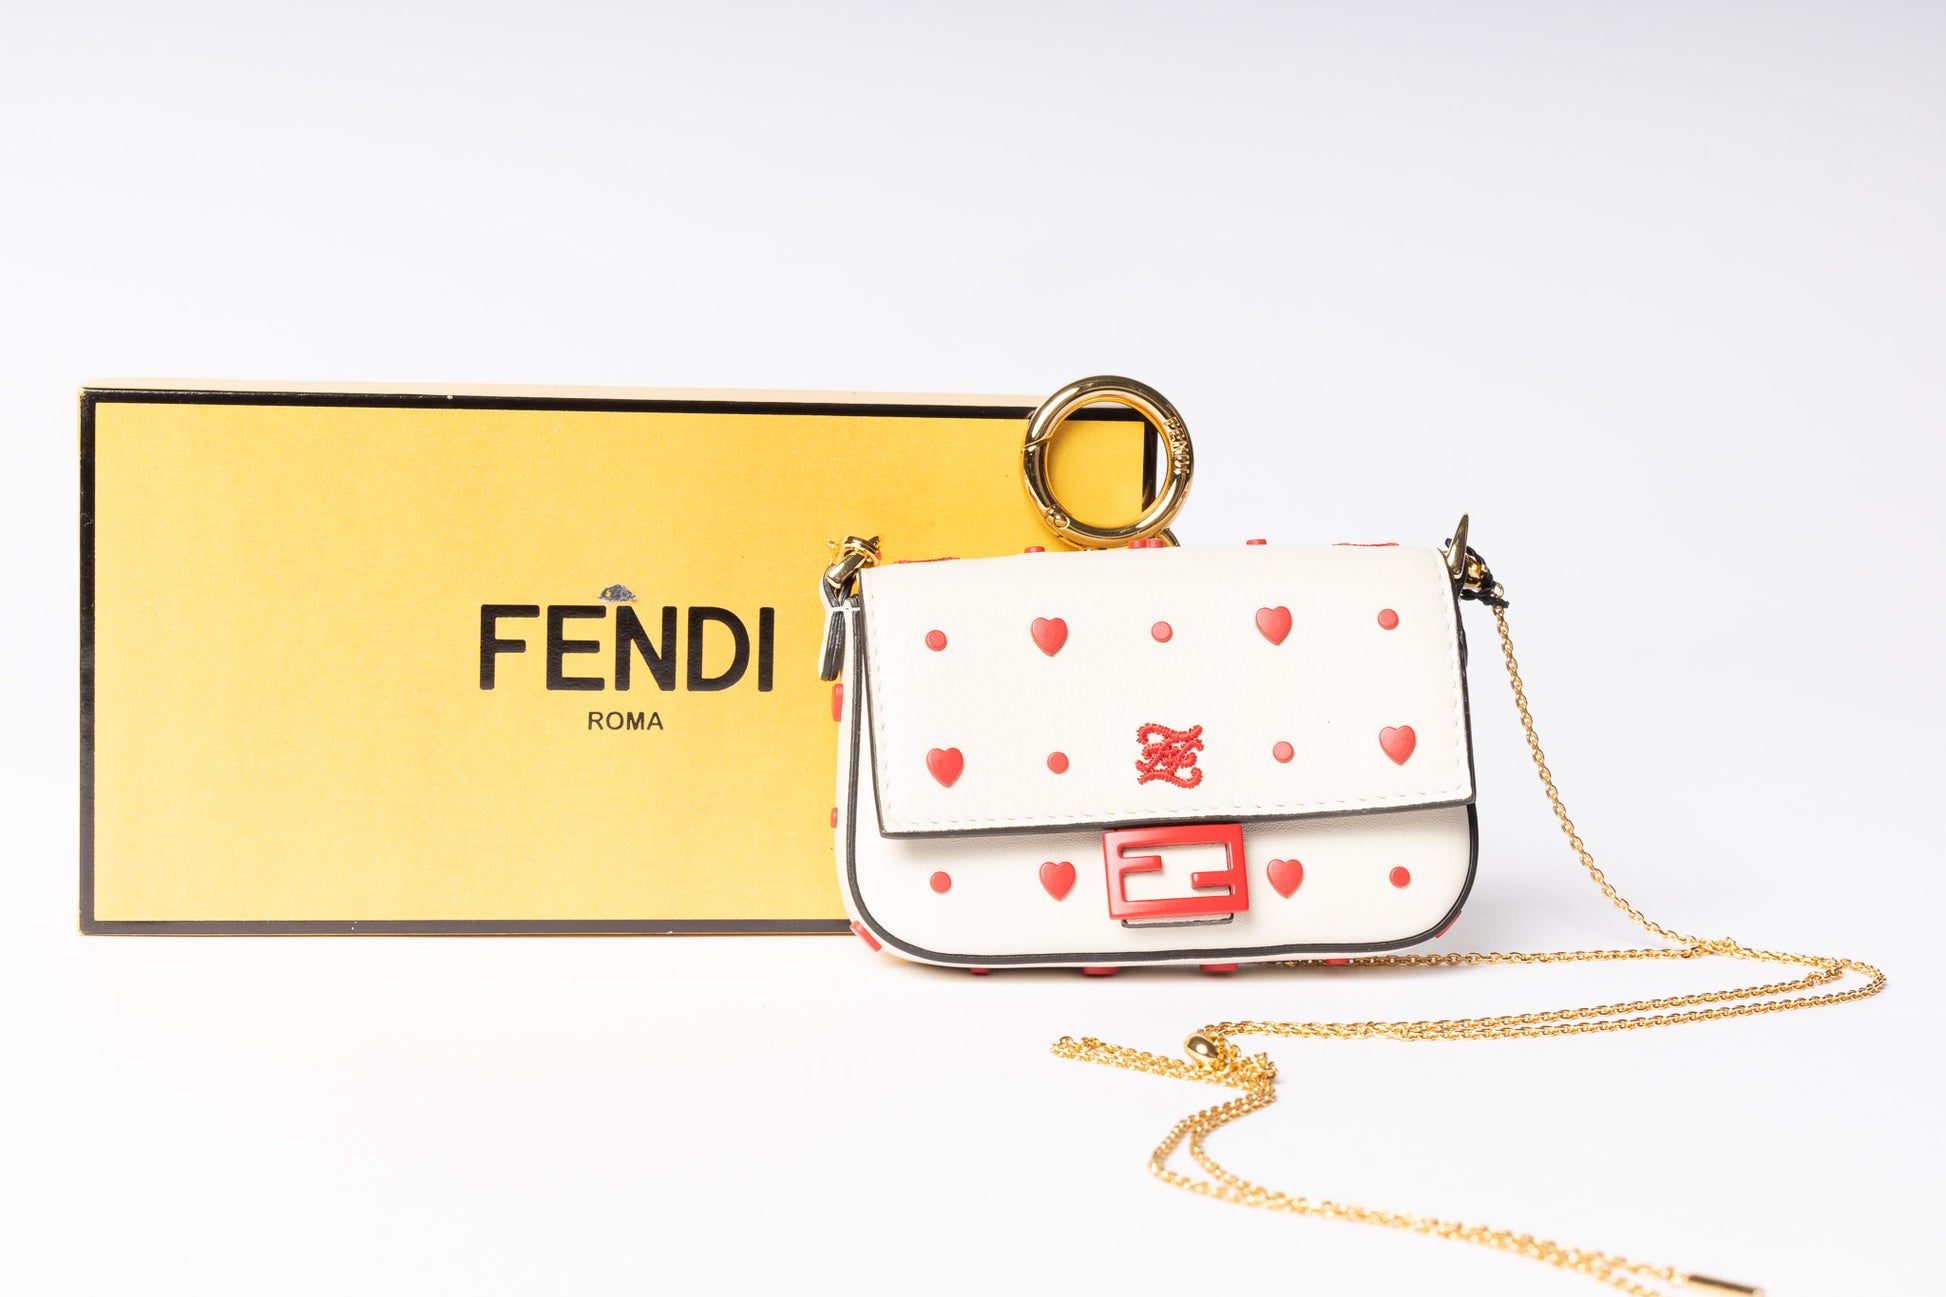 Fendi Micro Baguette Heart Bag - Playful charm and style in a compact accessory that steals hearts